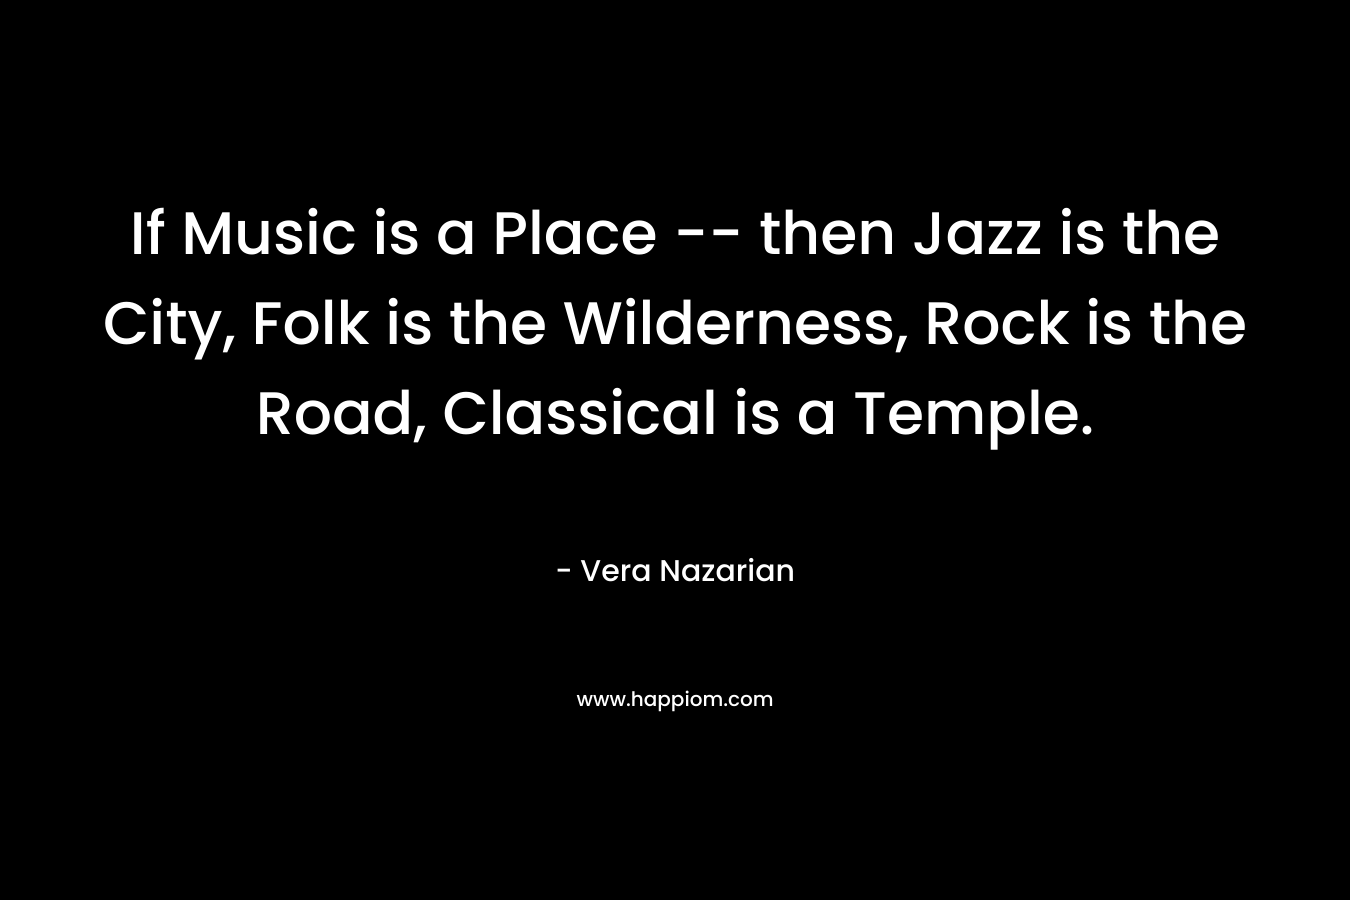 If Music is a Place -- then Jazz is the City, Folk is the Wilderness, Rock is the Road, Classical is a Temple.